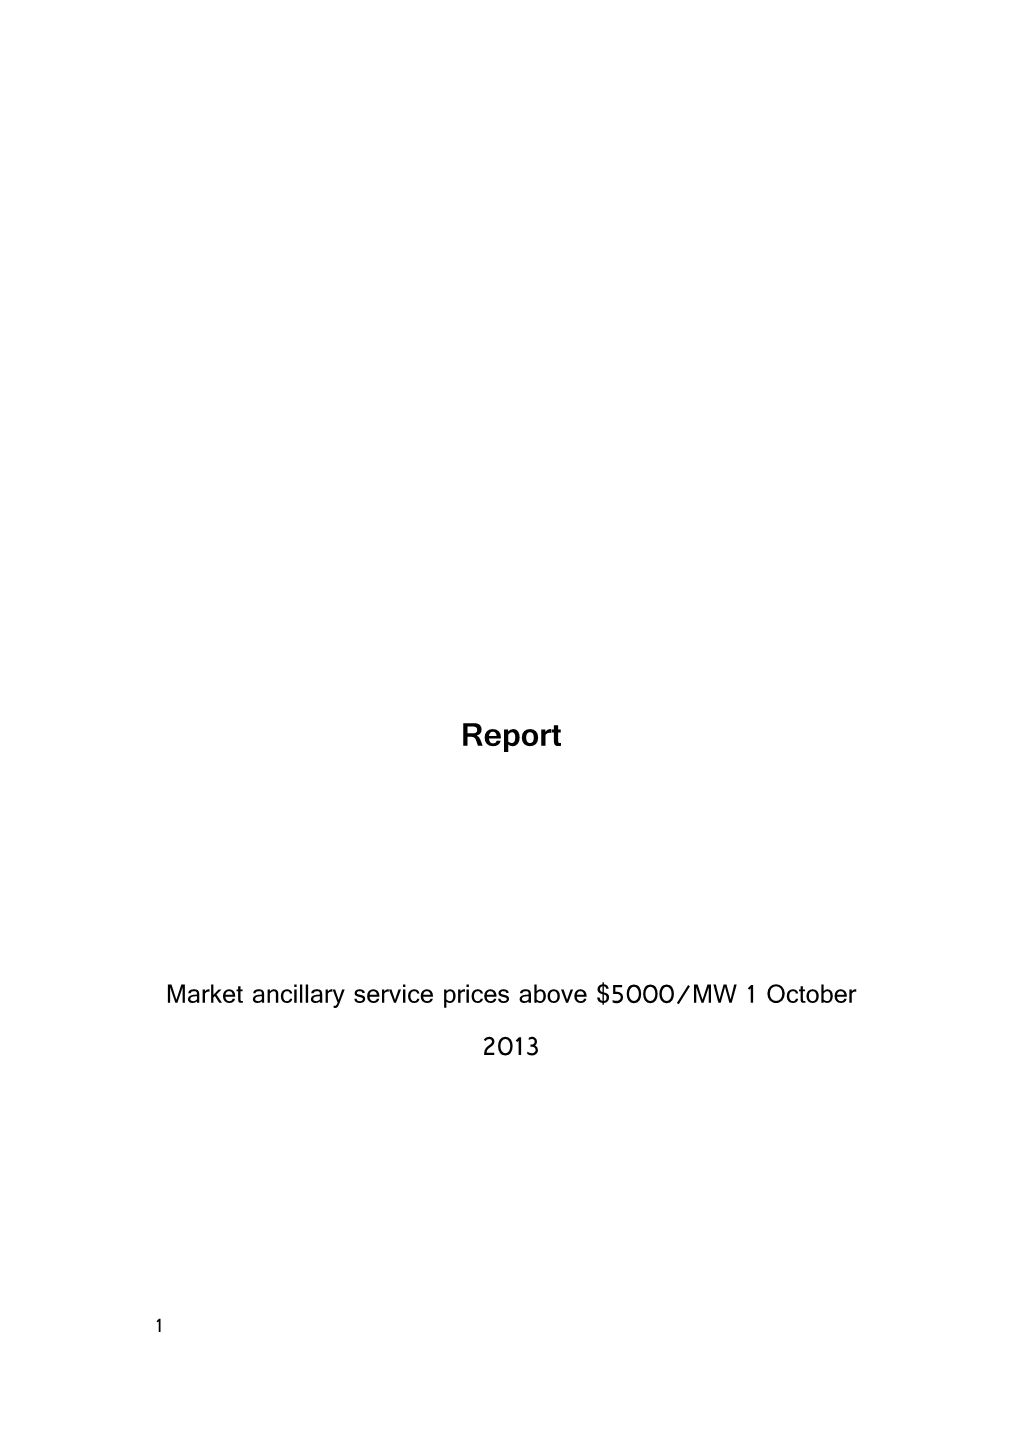 Market Ancillary Service Prices Above $5000/MW 1October 2013